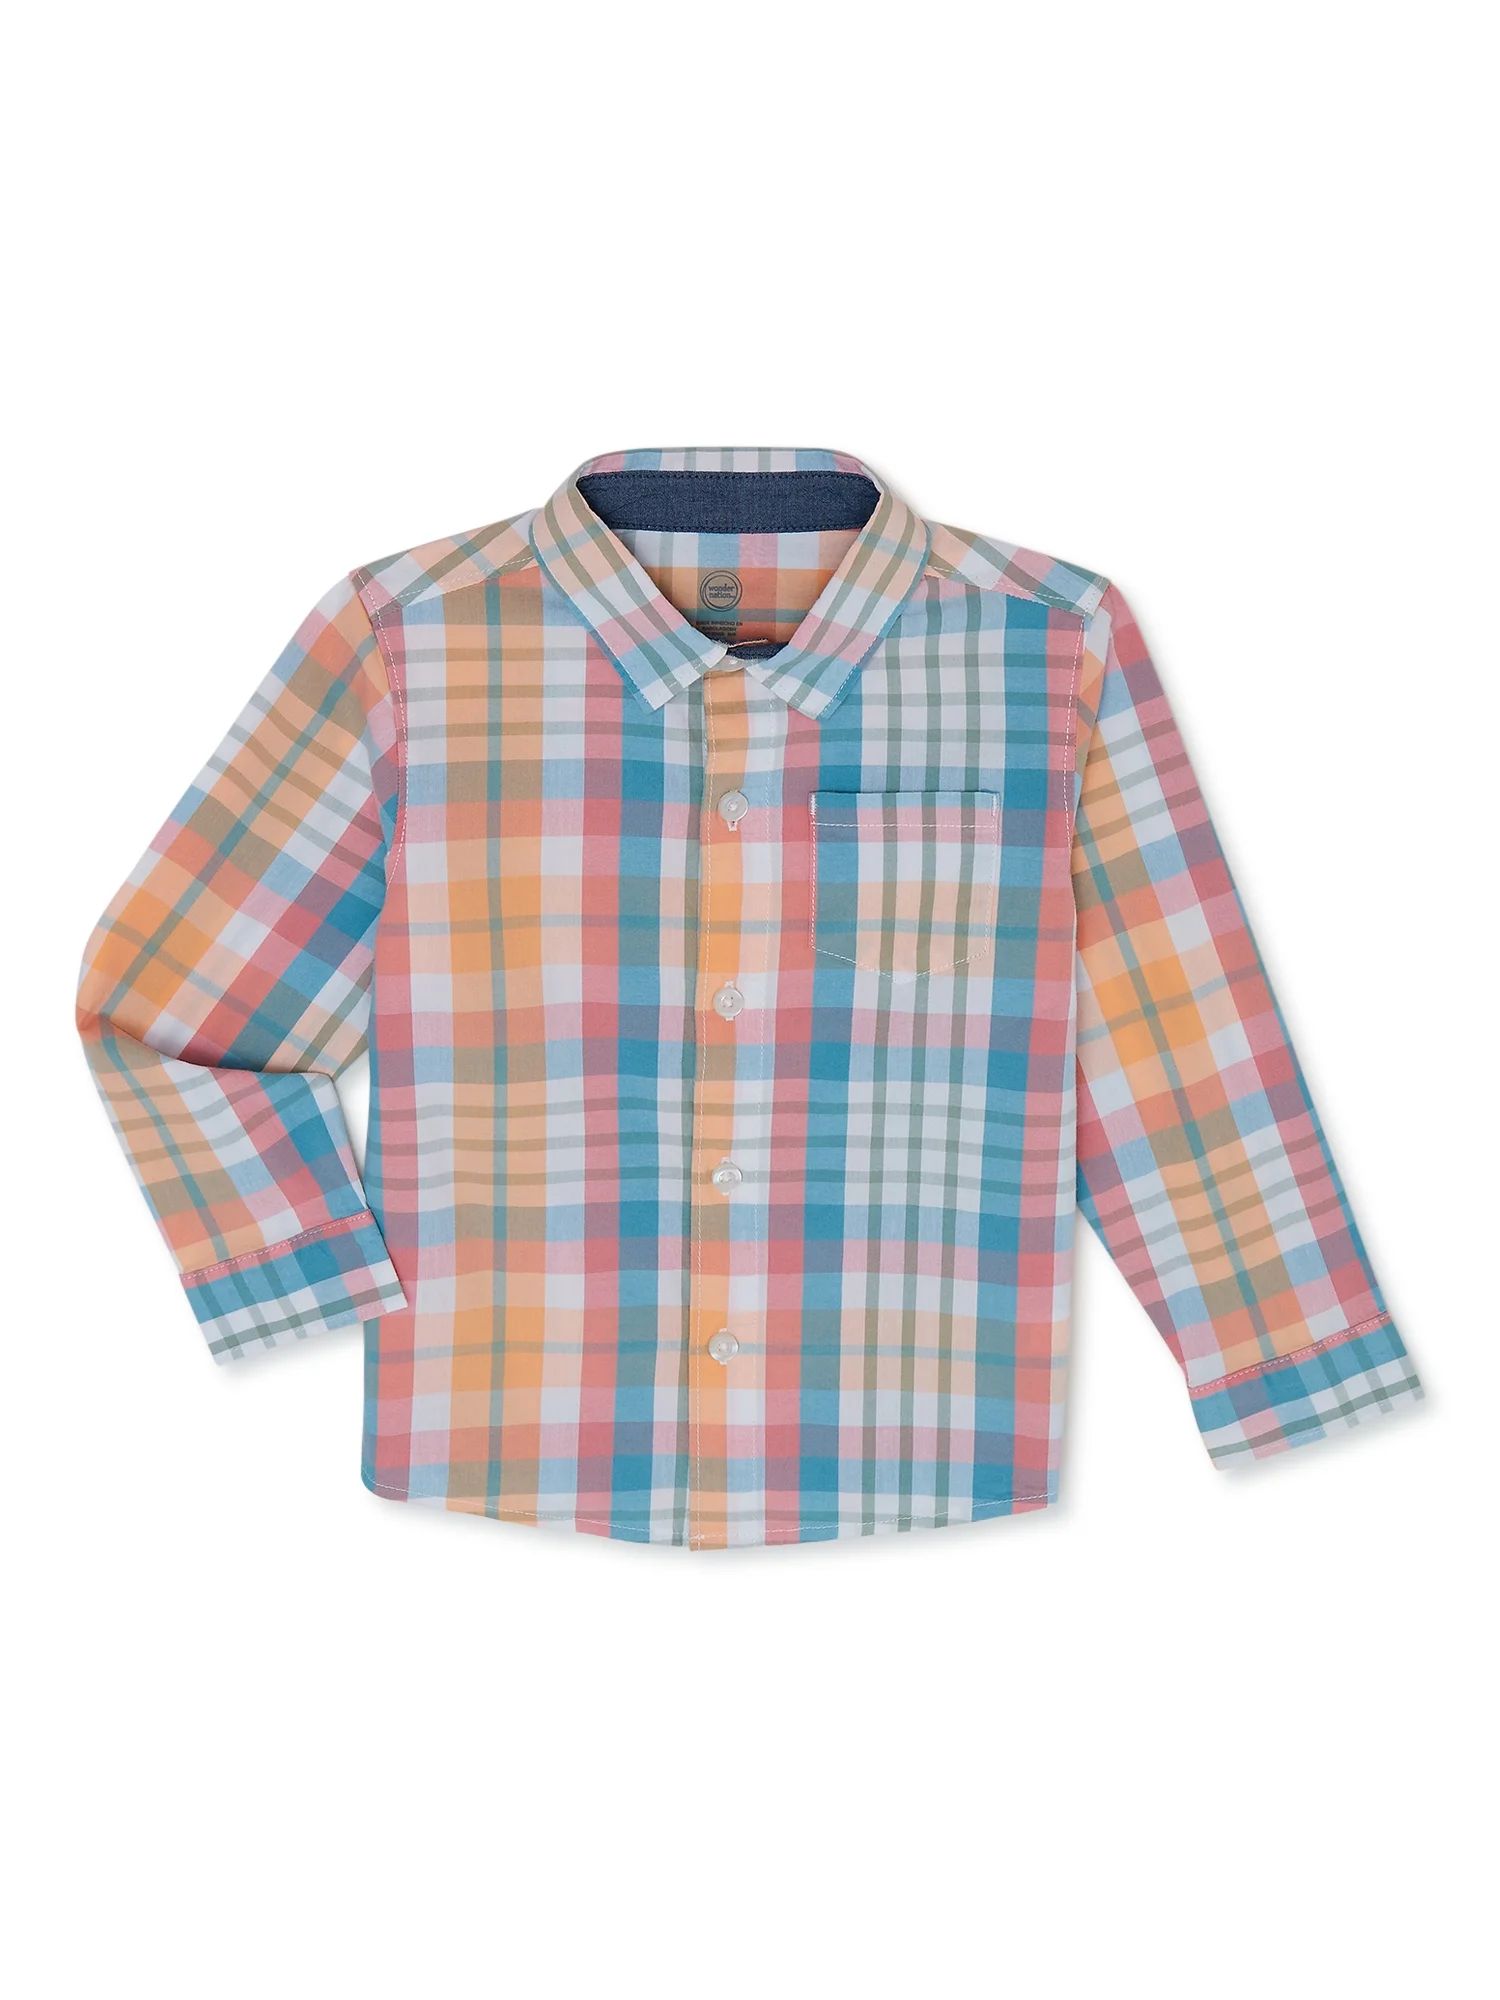 Wonder Nation Toddler Boys Woven Shirt with Long Sleeves, Sizes 18M-5T | Walmart (US)